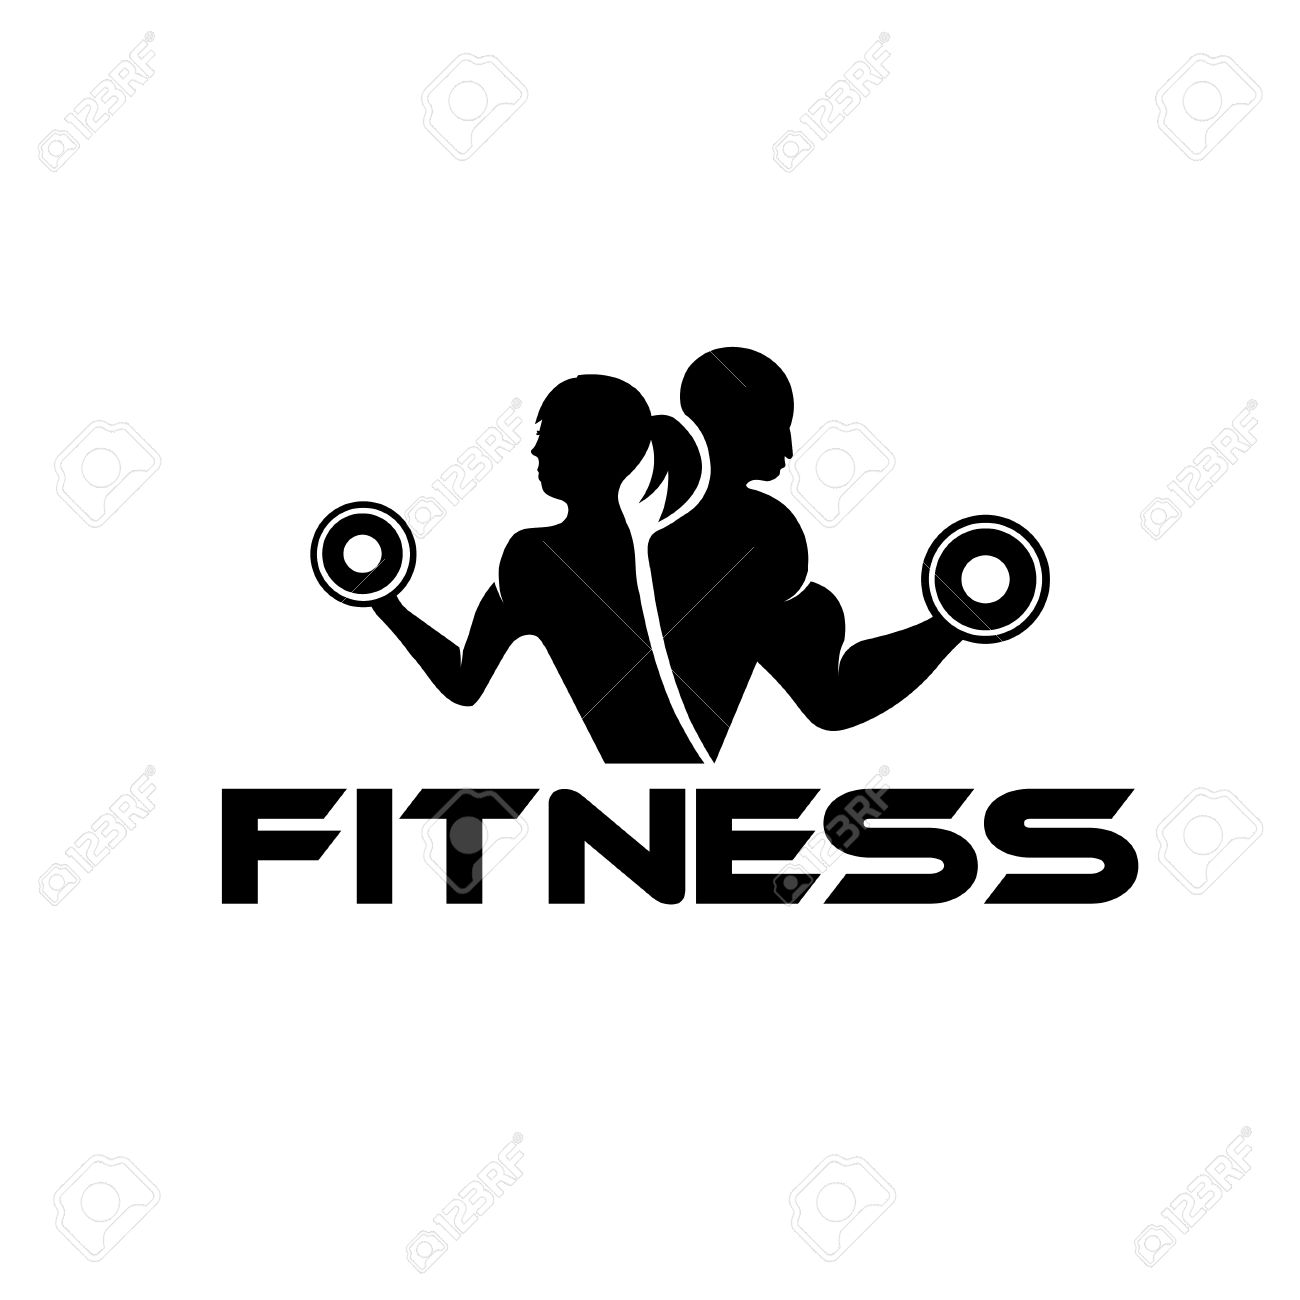 fitness animated clipart - photo #40